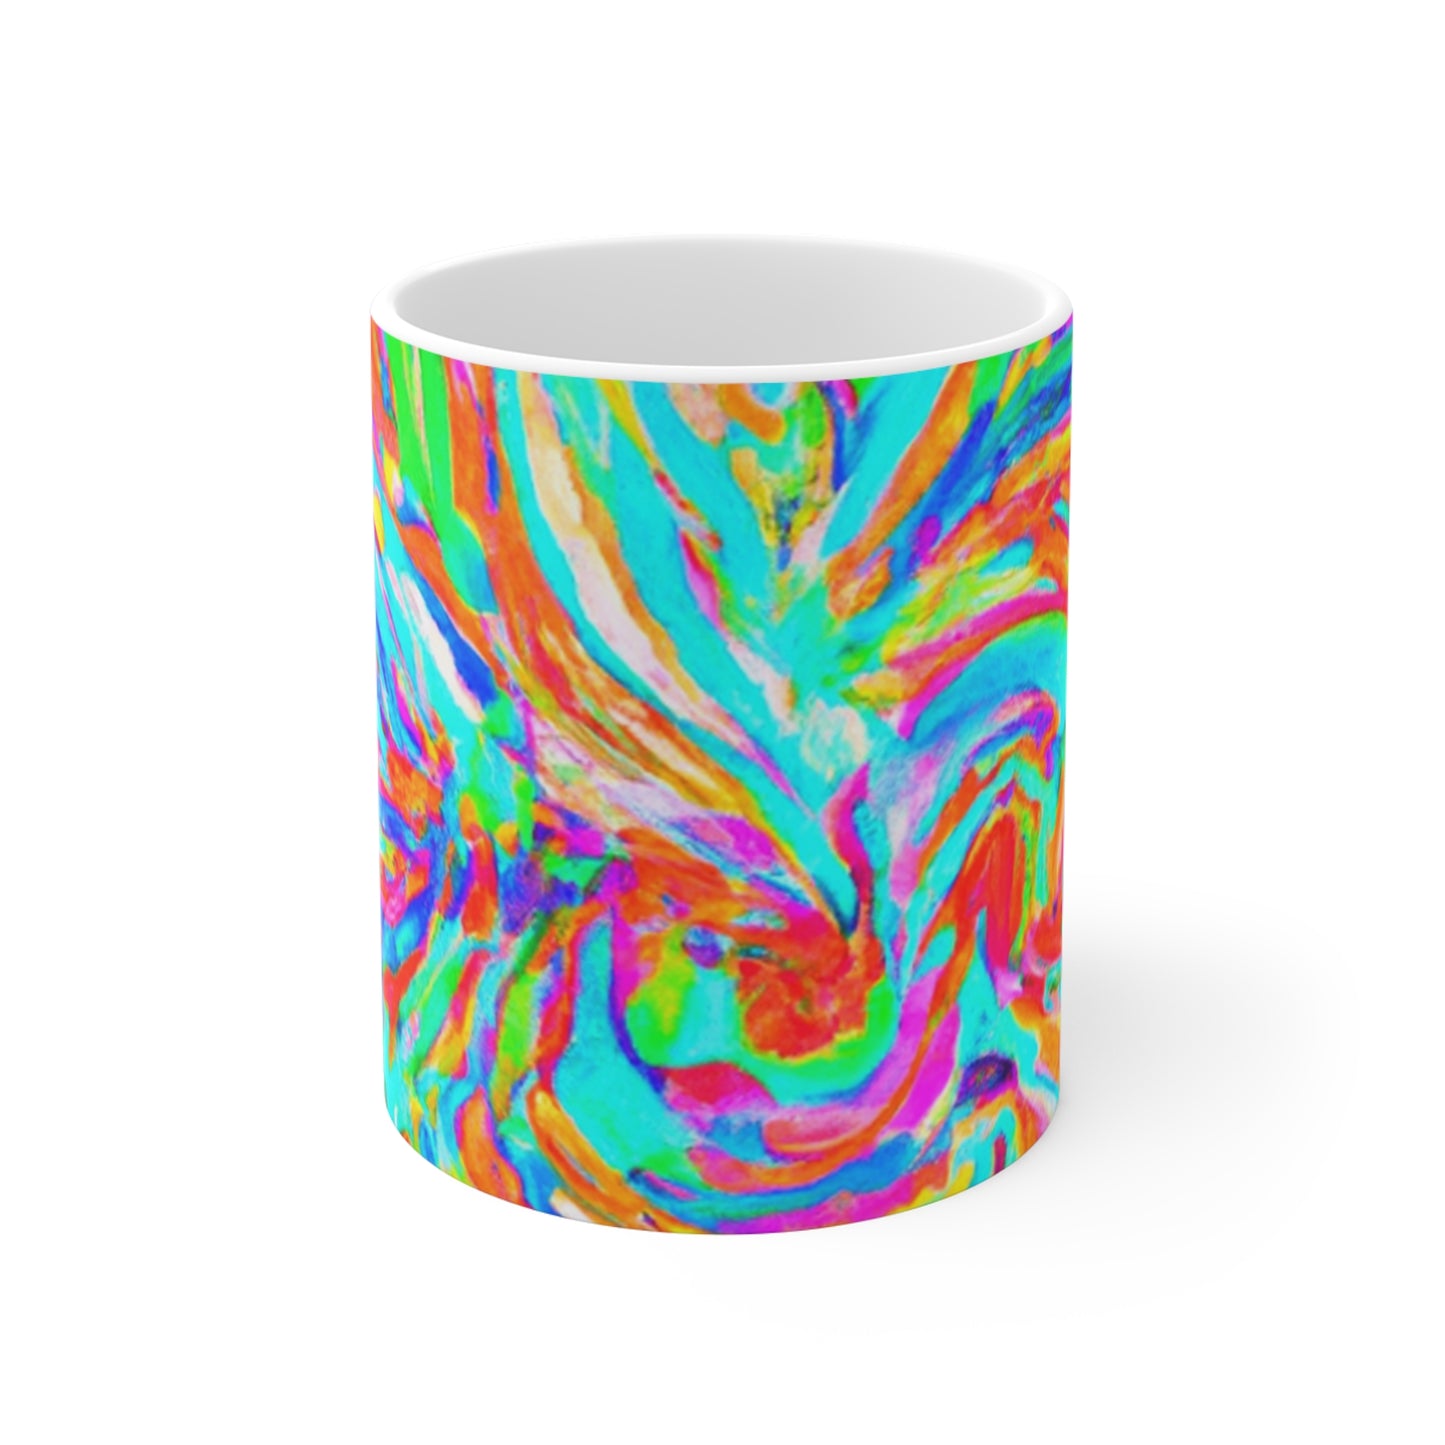 Millie's Coffee - Psychedelic Coffee Cup Mug 11 Ounce